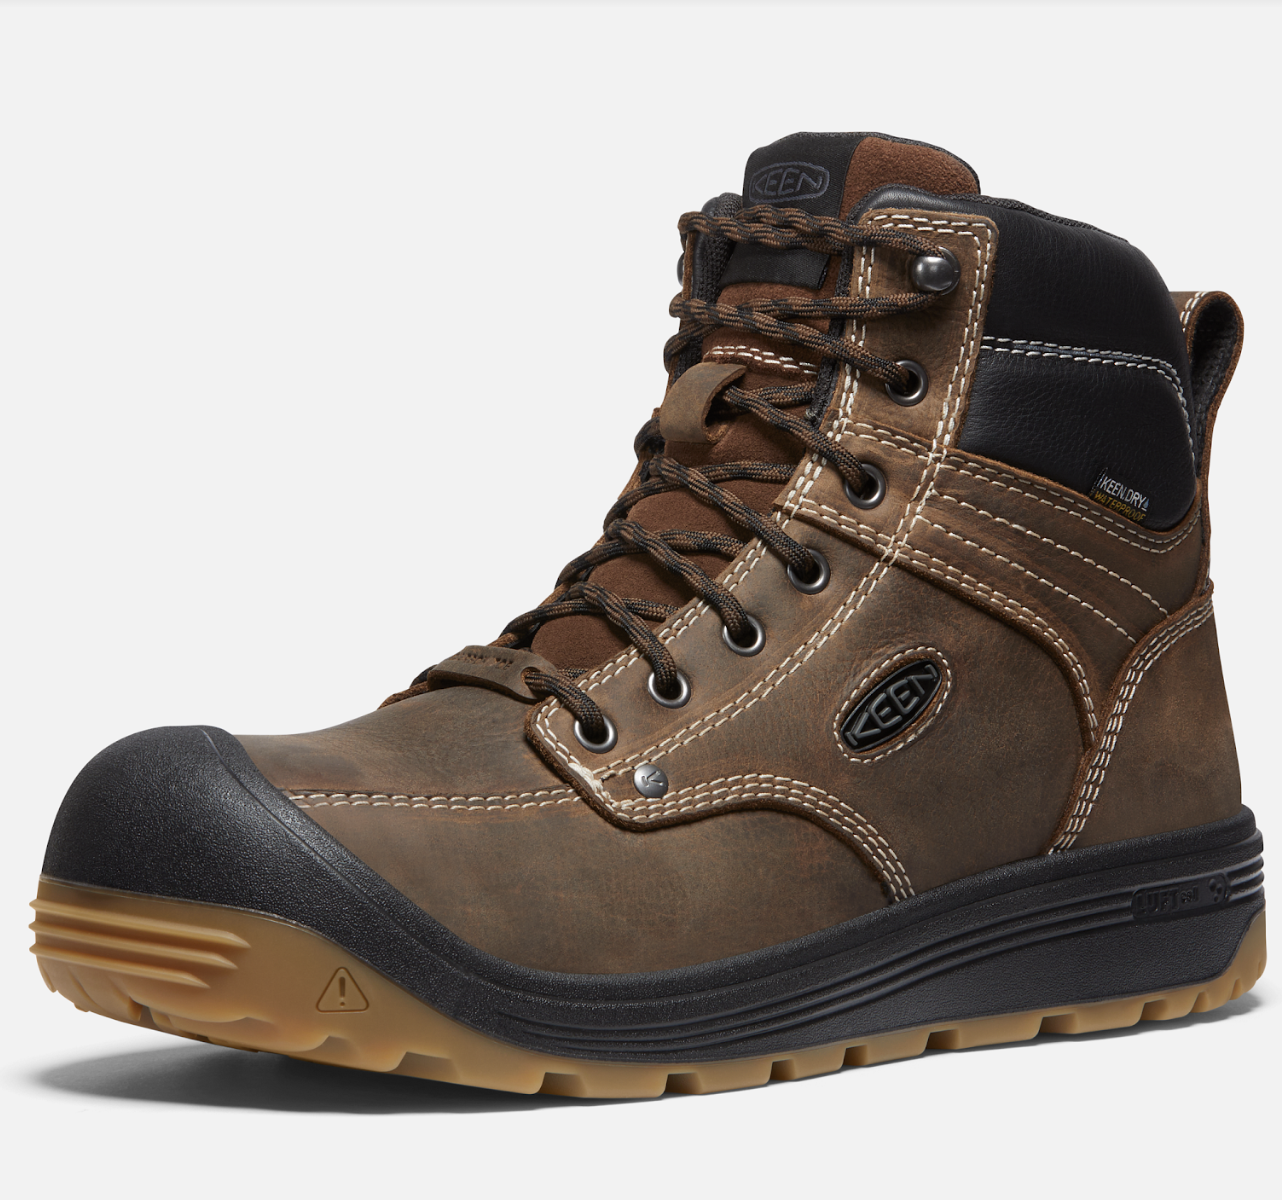 New Work Boots Featuring a Rubber Cap - Roofing